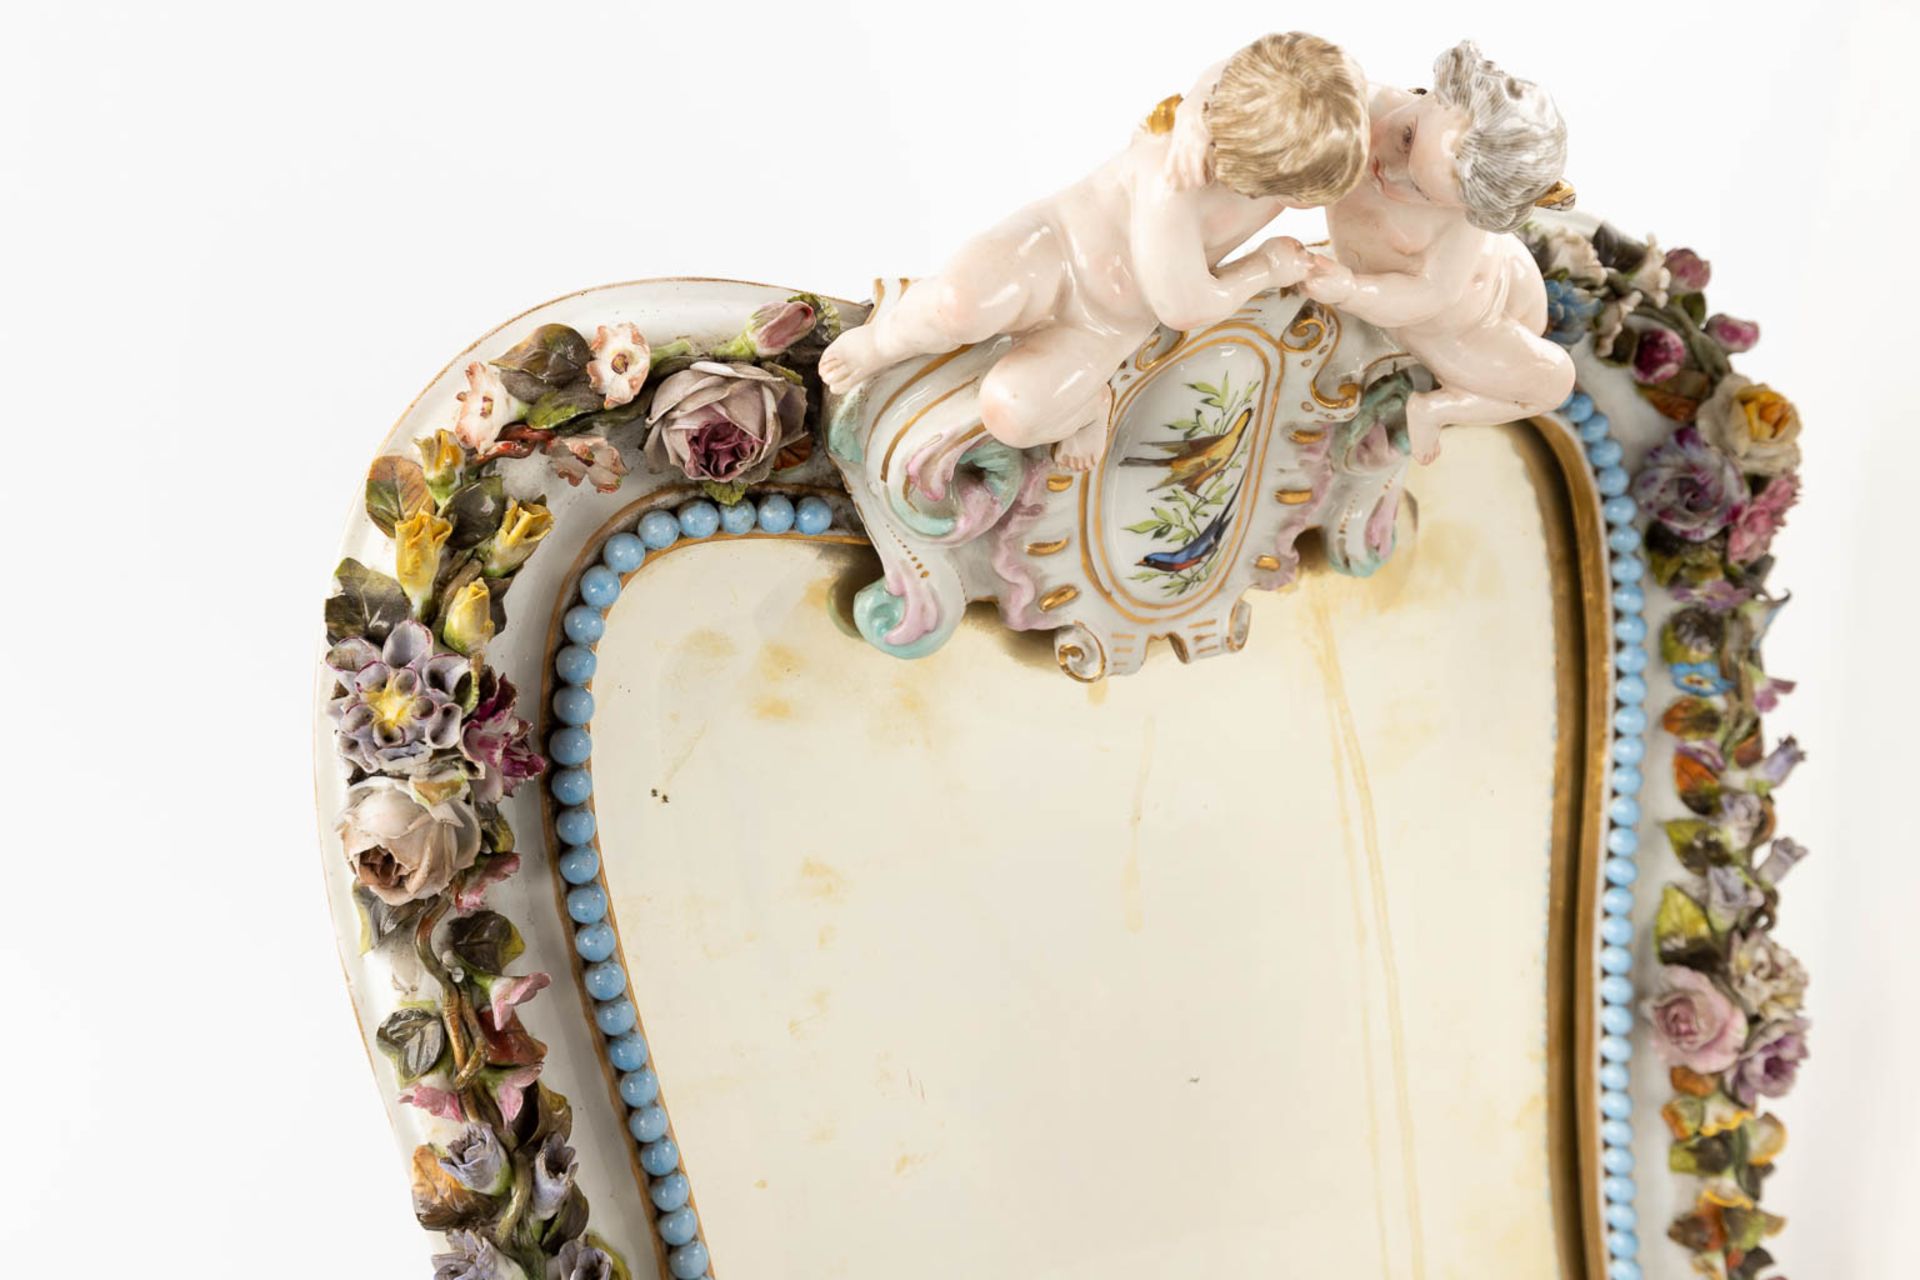 JACOB-PETIT (1796-1868) 'Table Mirror' made of porcelain. 19th C. (W:38 x H:51 cm) - Image 10 of 19